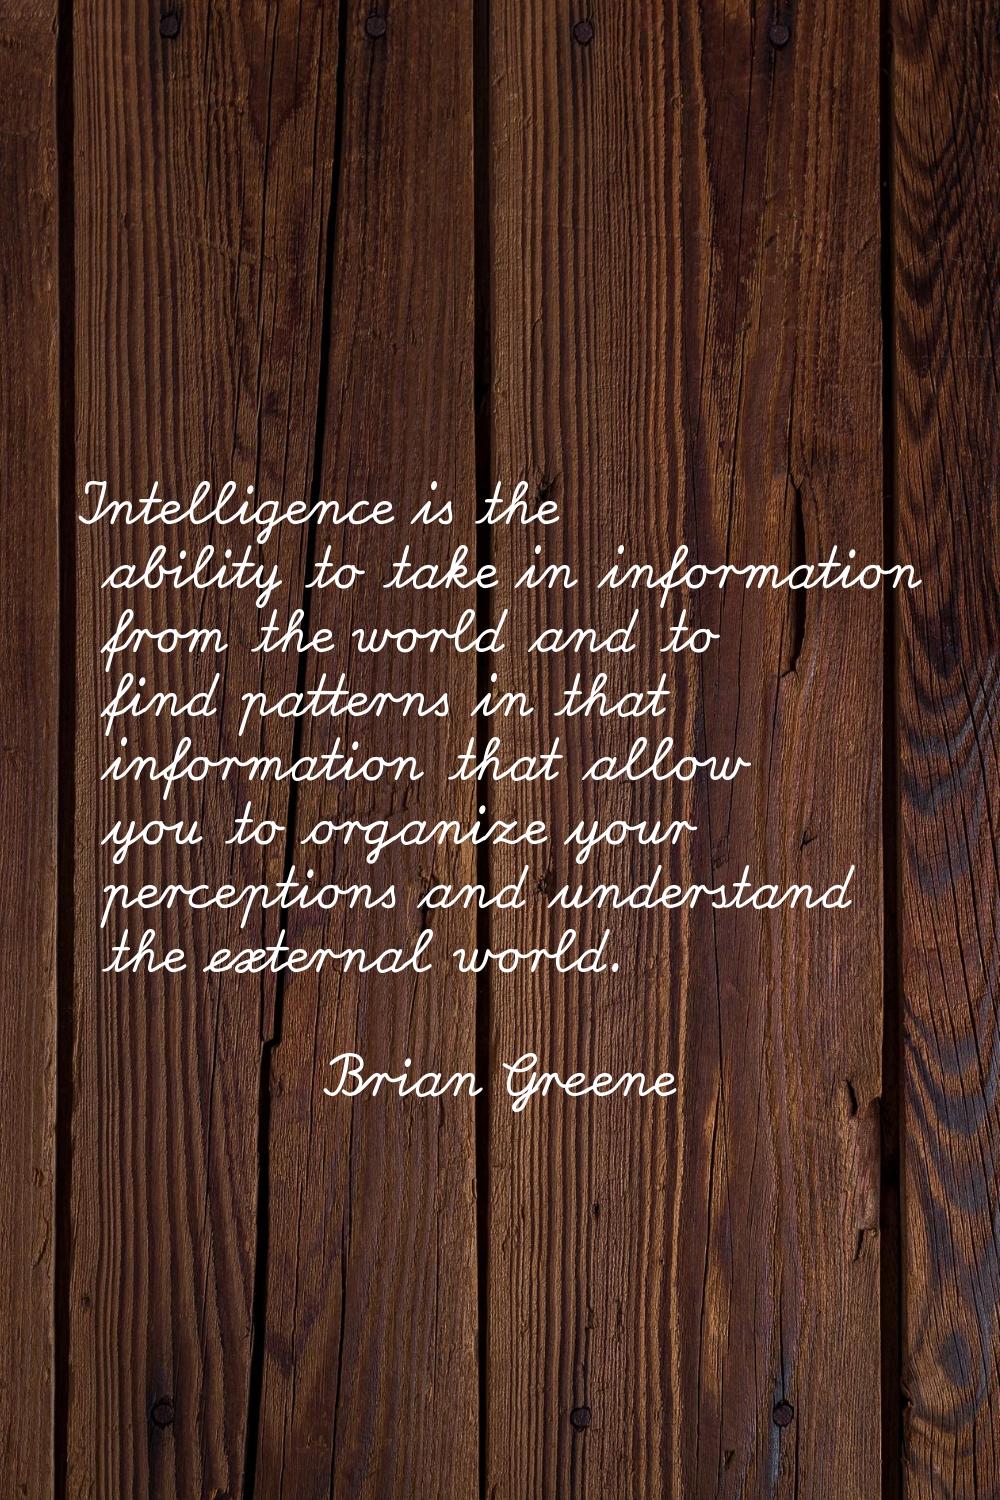 Intelligence is the ability to take in information from the world and to find patterns in that info